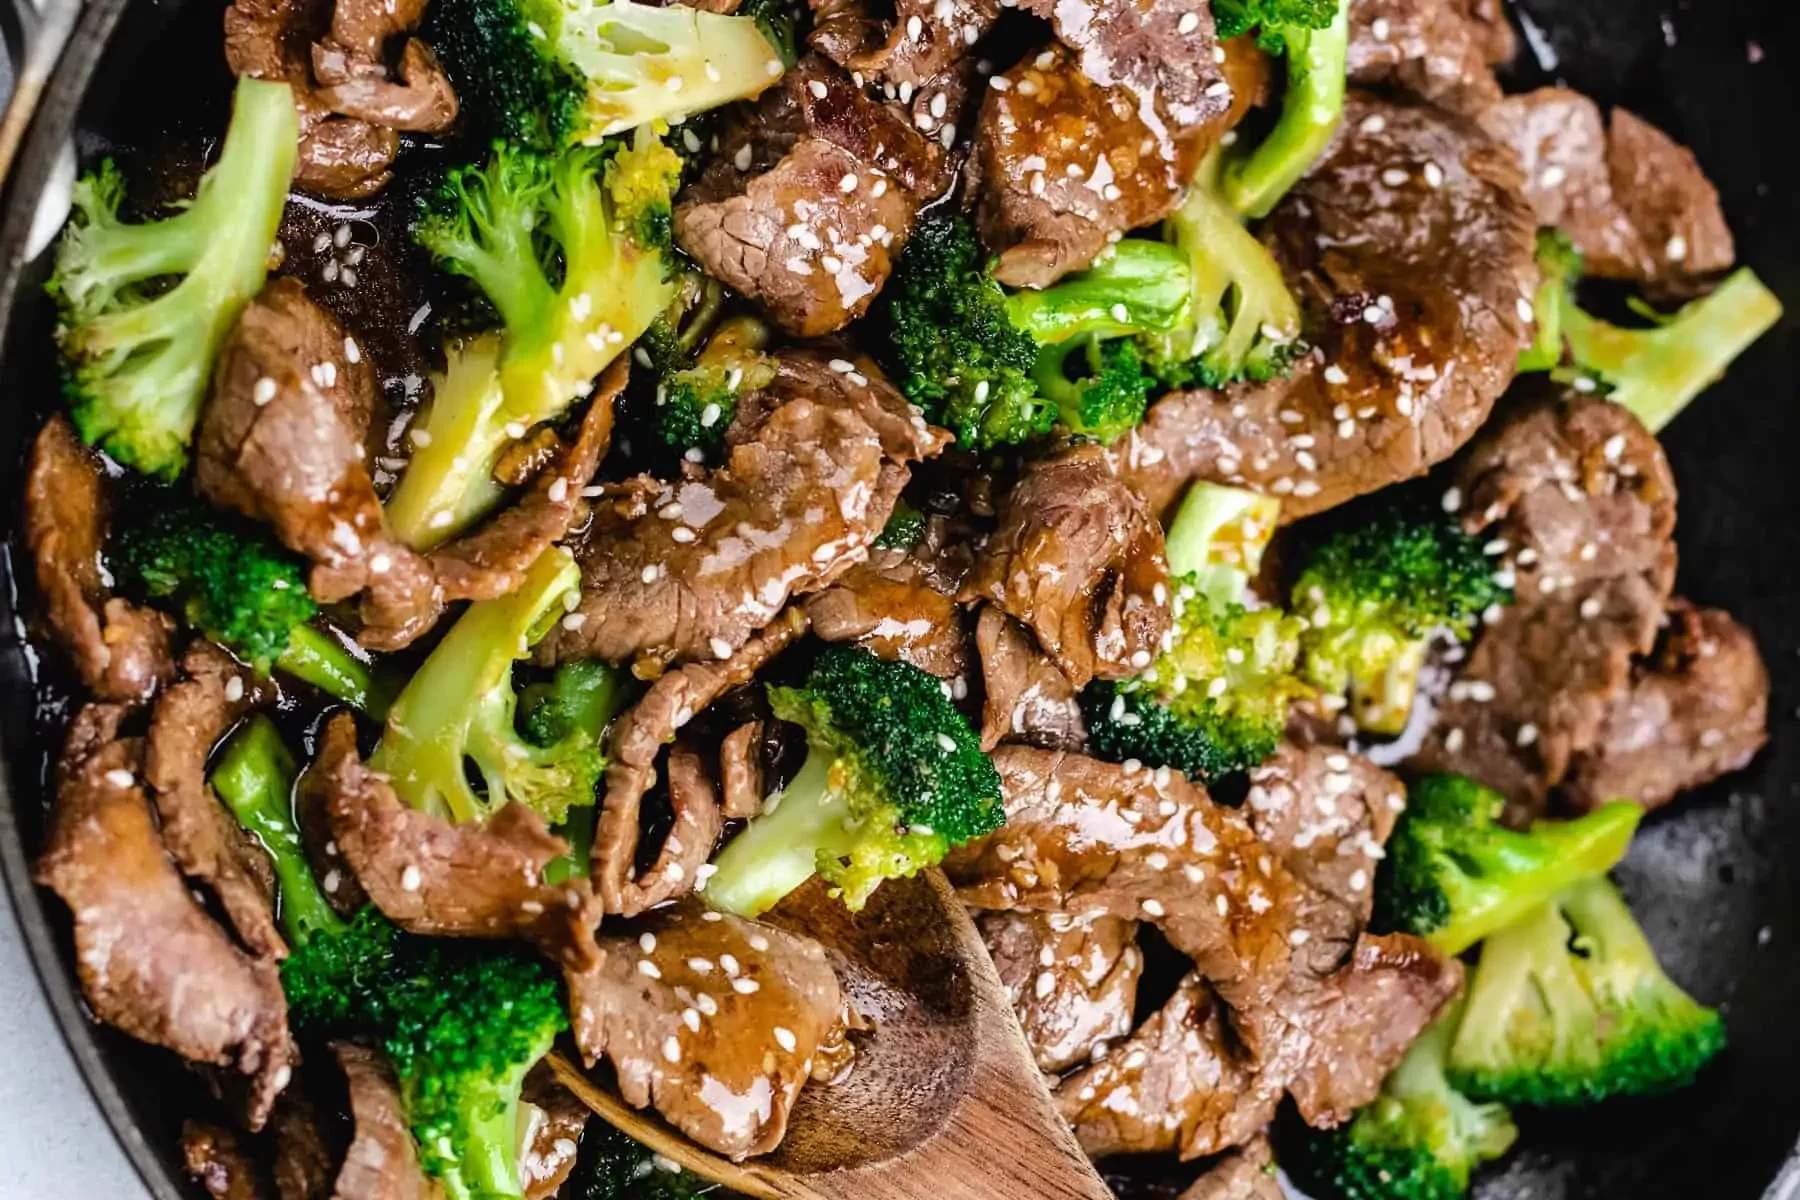 Beef and Broccoli Stir Fry Recipe Details